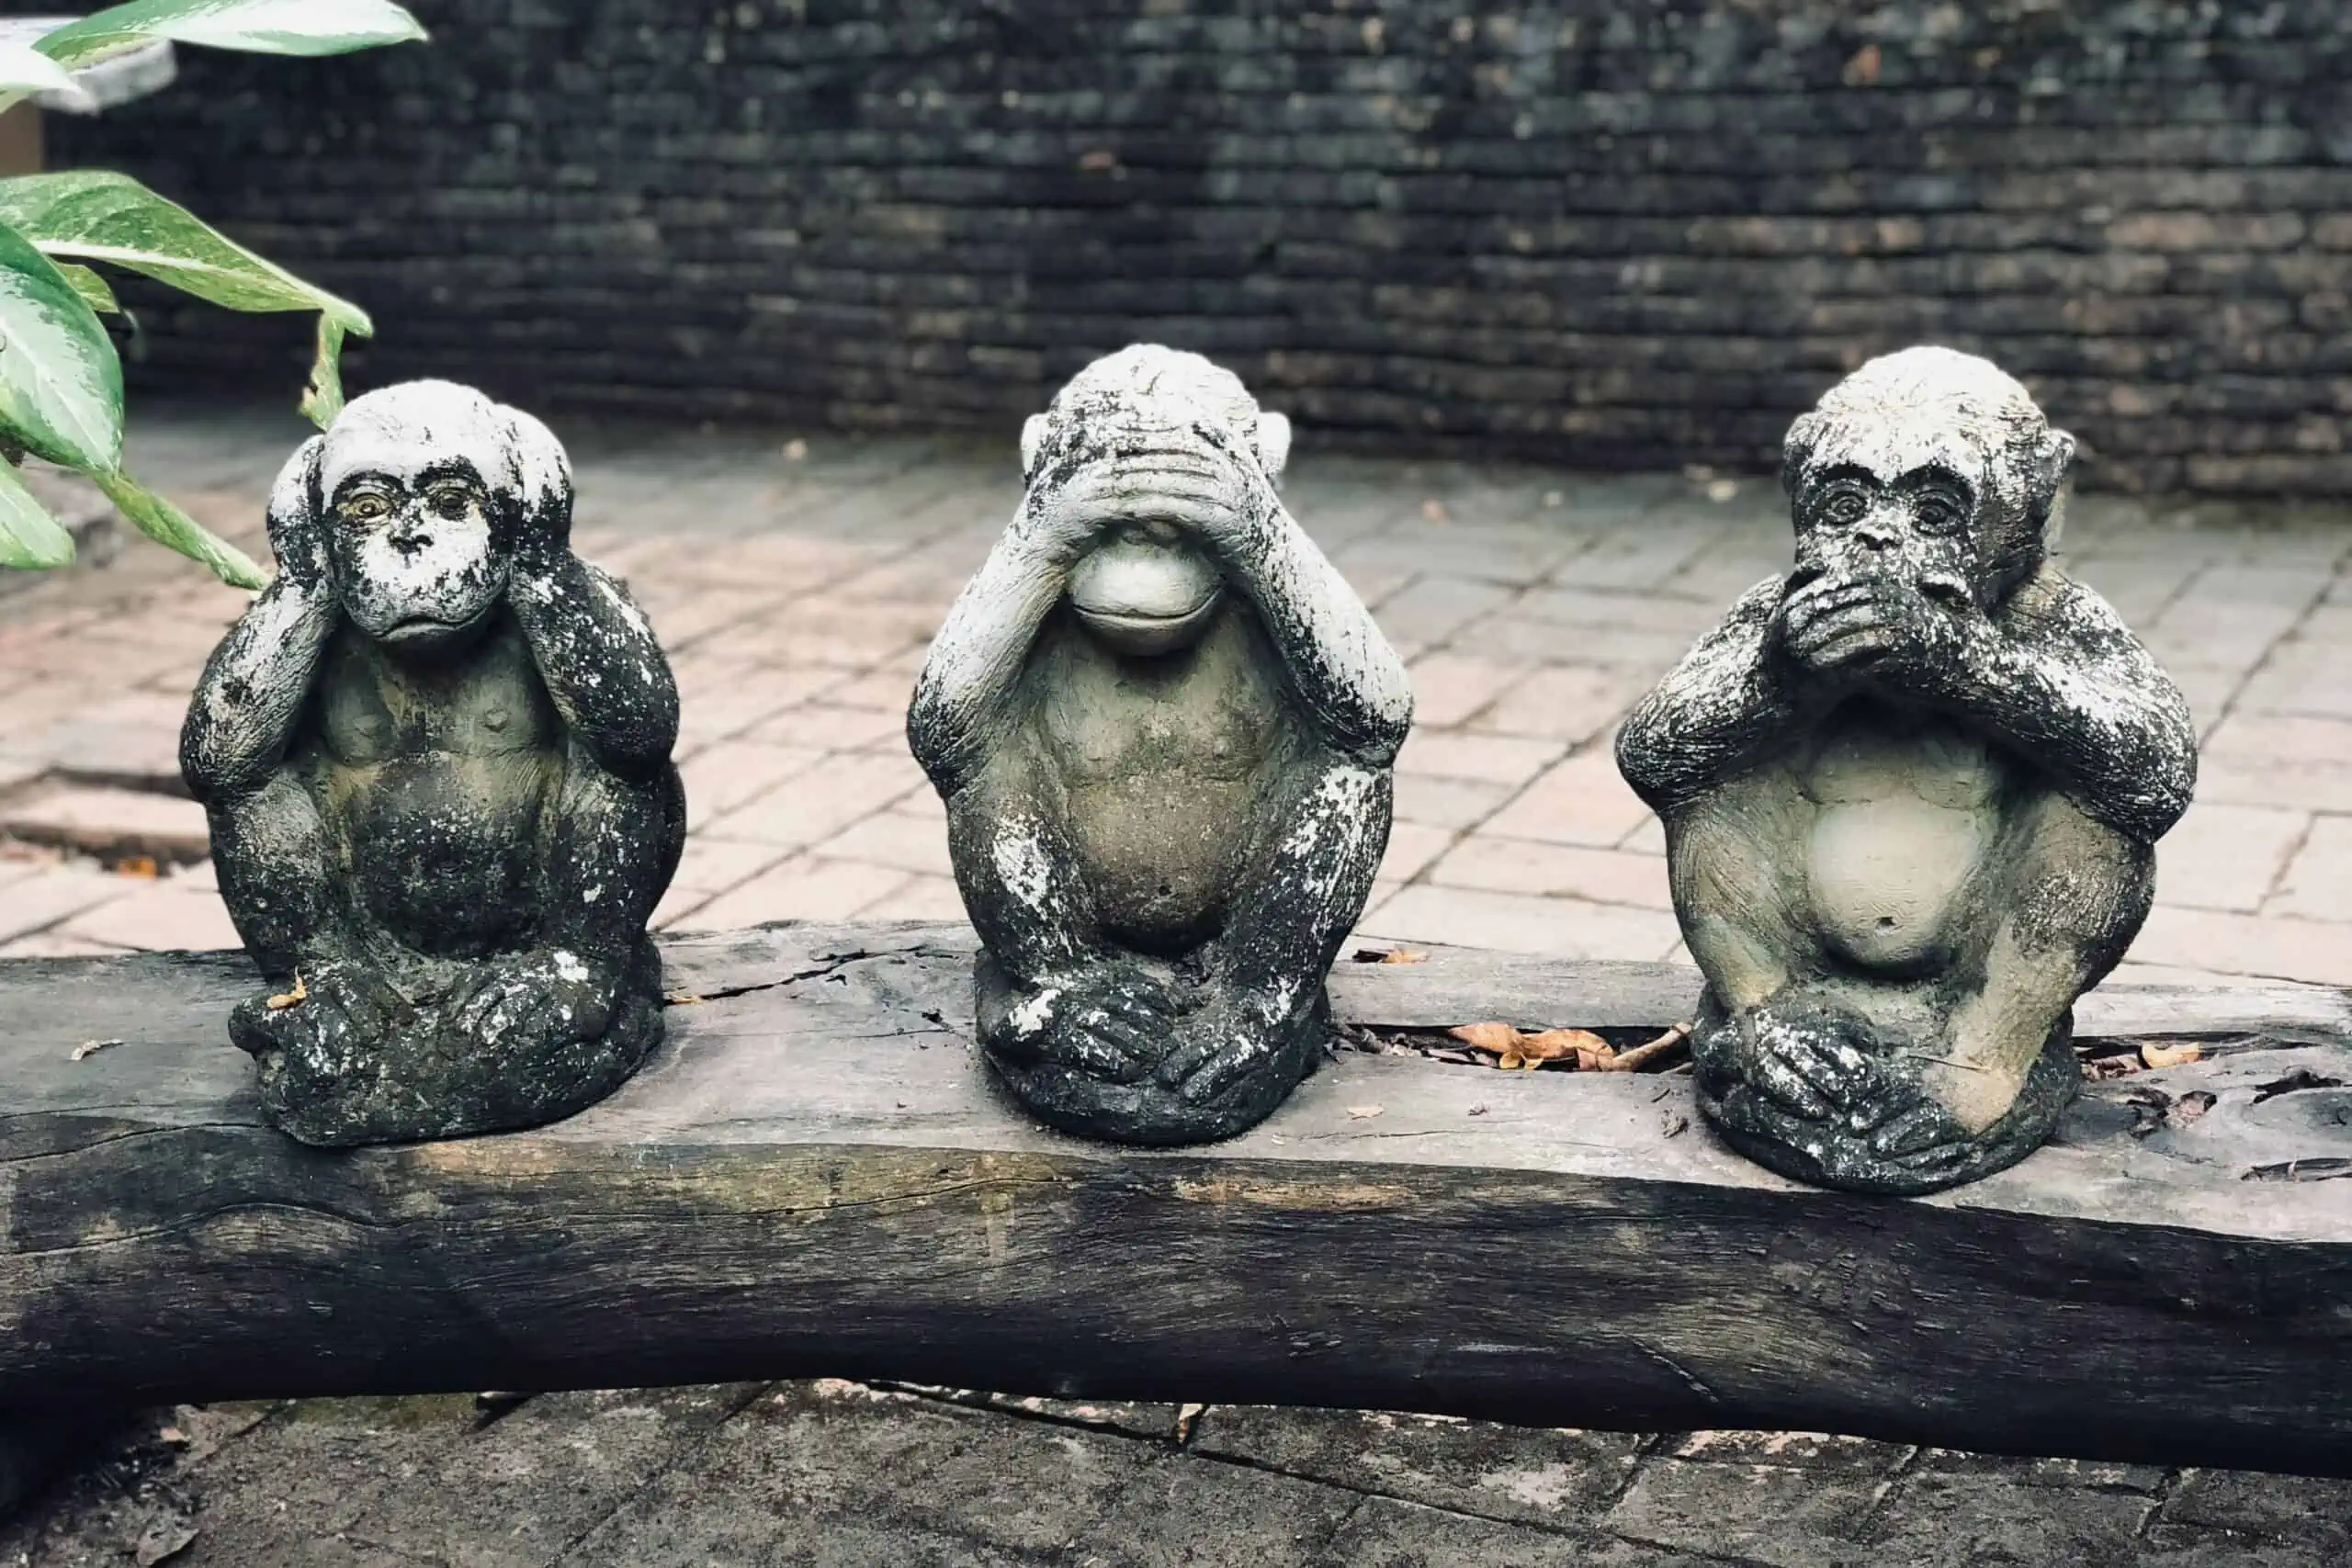 Three Statues of Monkeys, one holding his hands over his ears, one over his eyes, one over his mouth